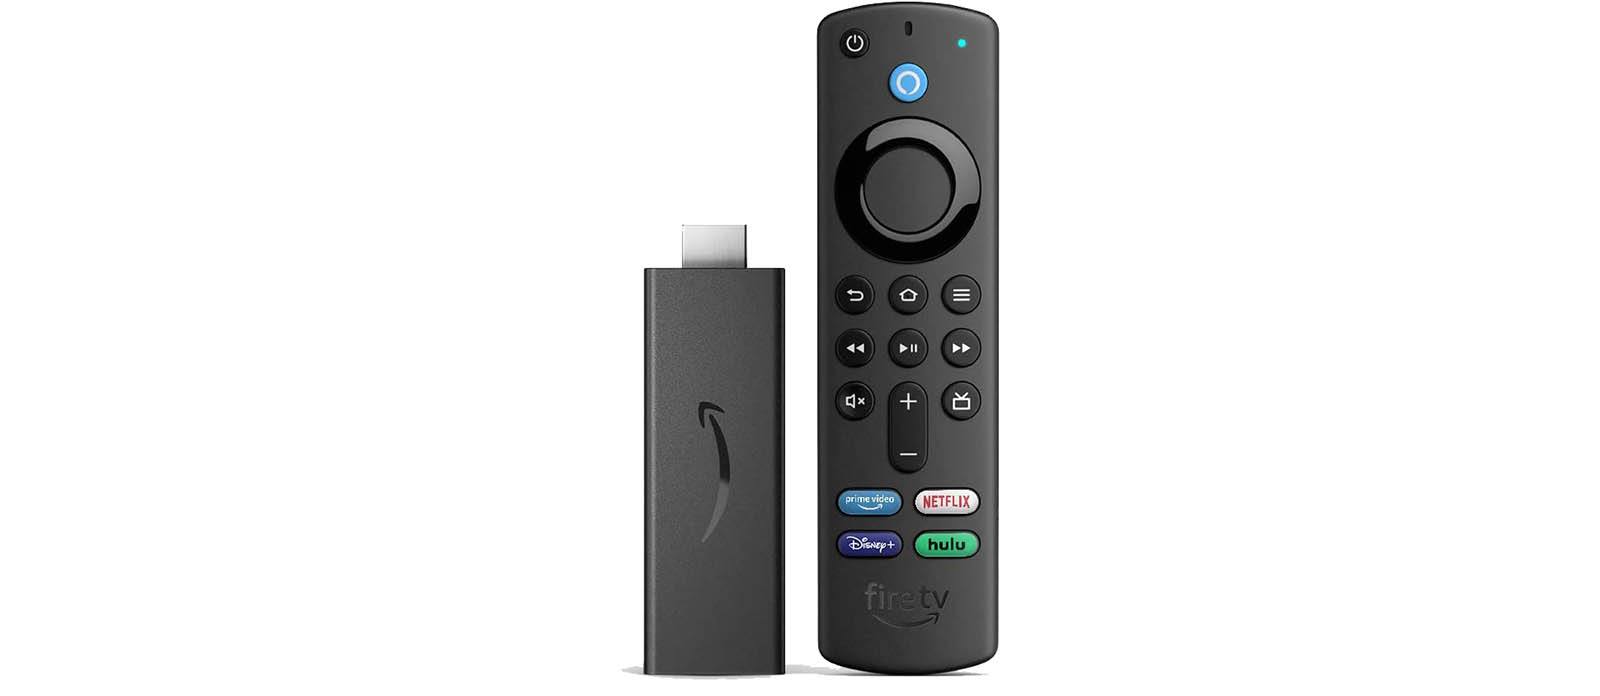 Amazon's New Fire TV Remote is Now Available - Cord Cutters News